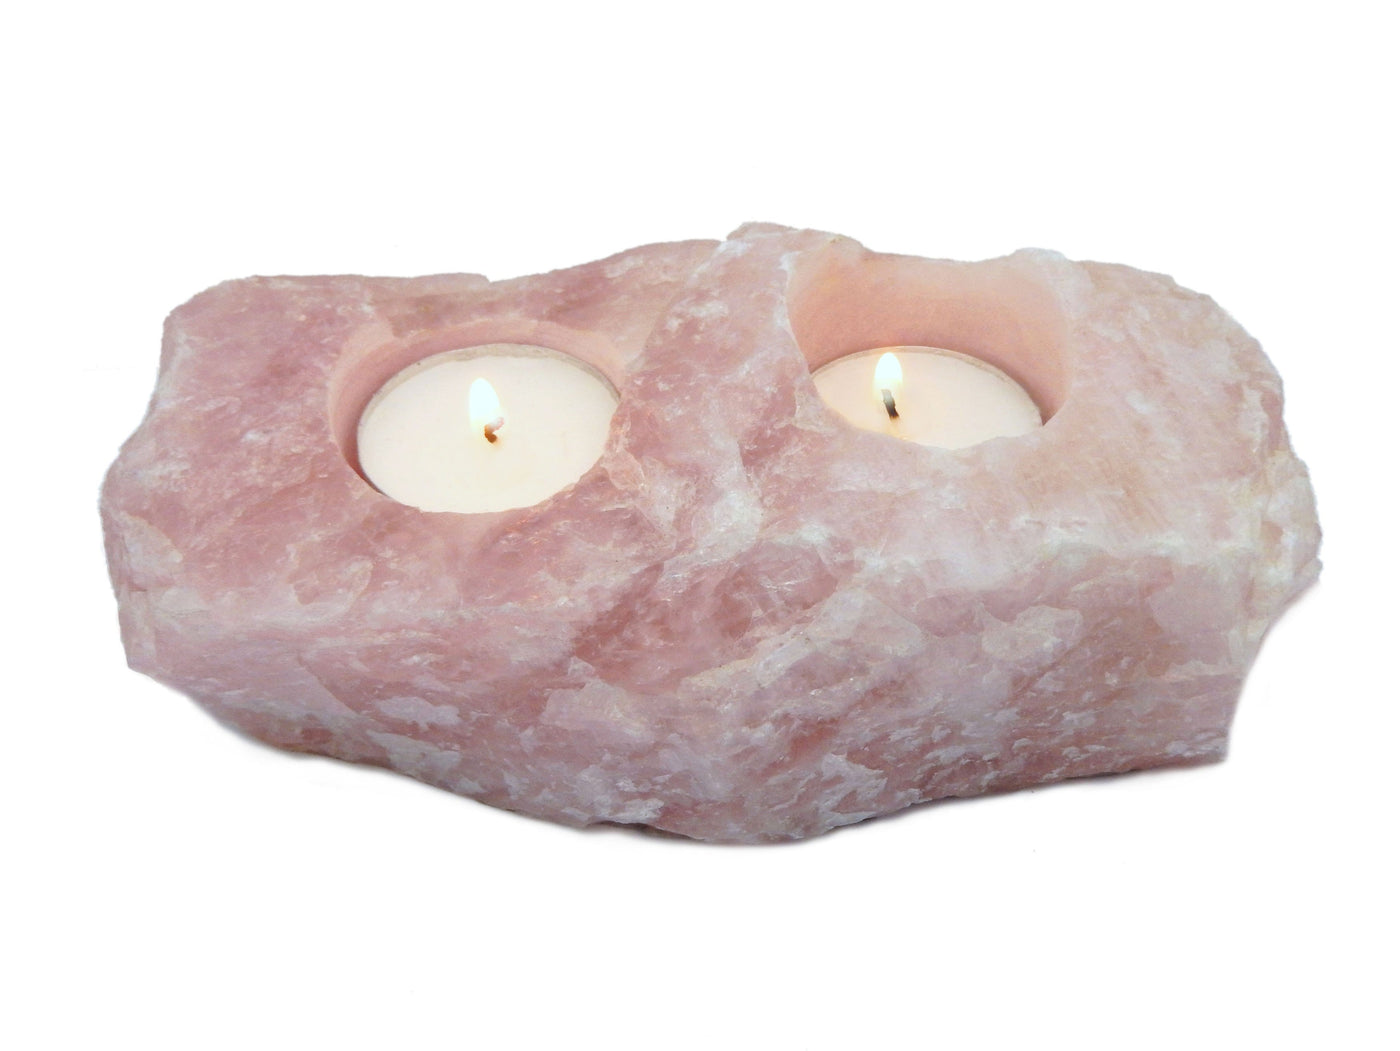 Rose Quartz Candle Holder with candles in both votives on white background